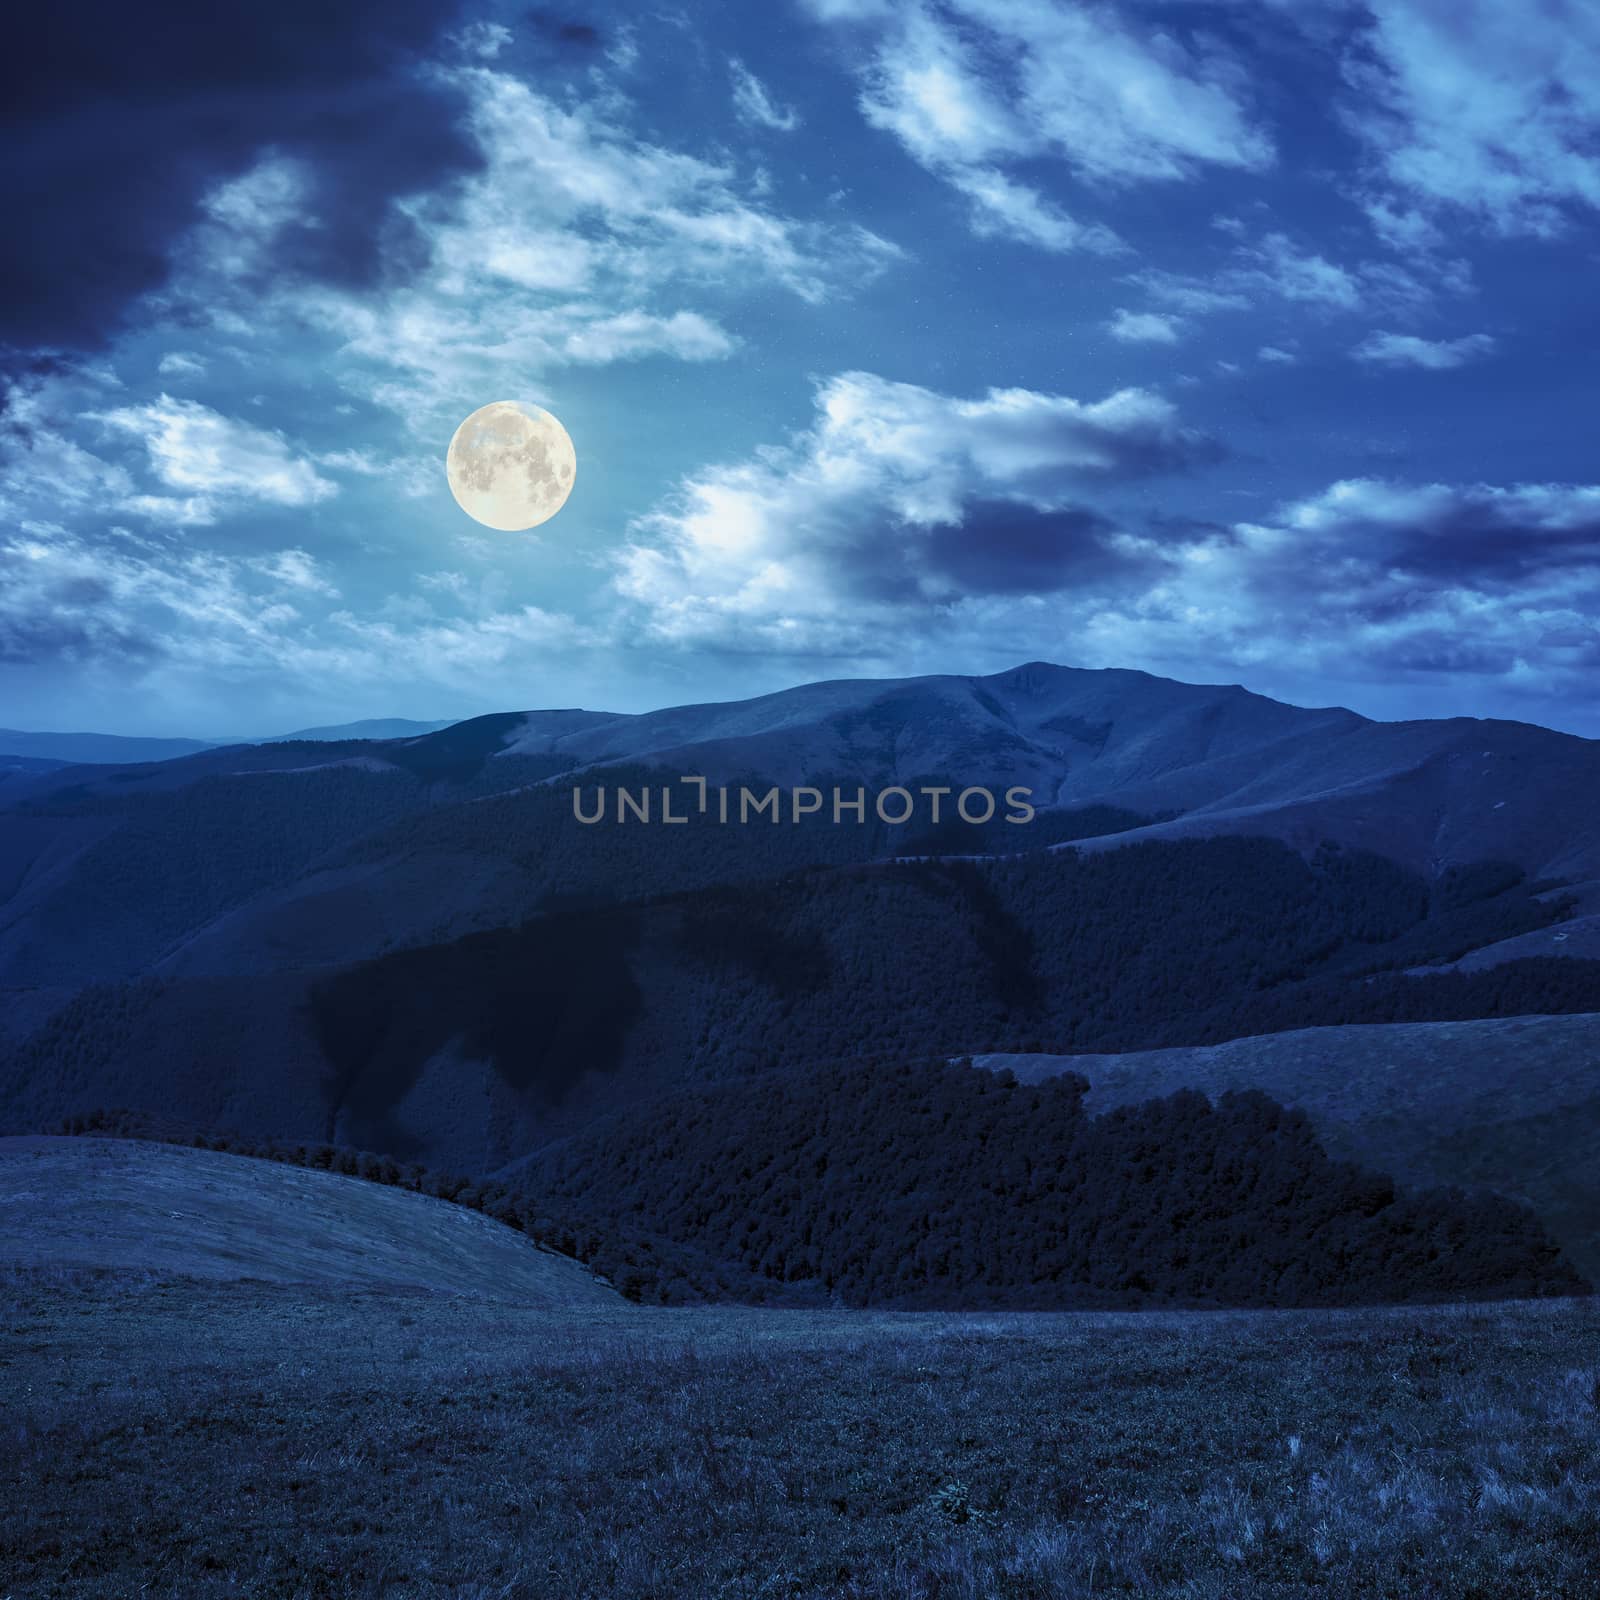 high wild grass and forest  at the top of the mountain at night in full moon light